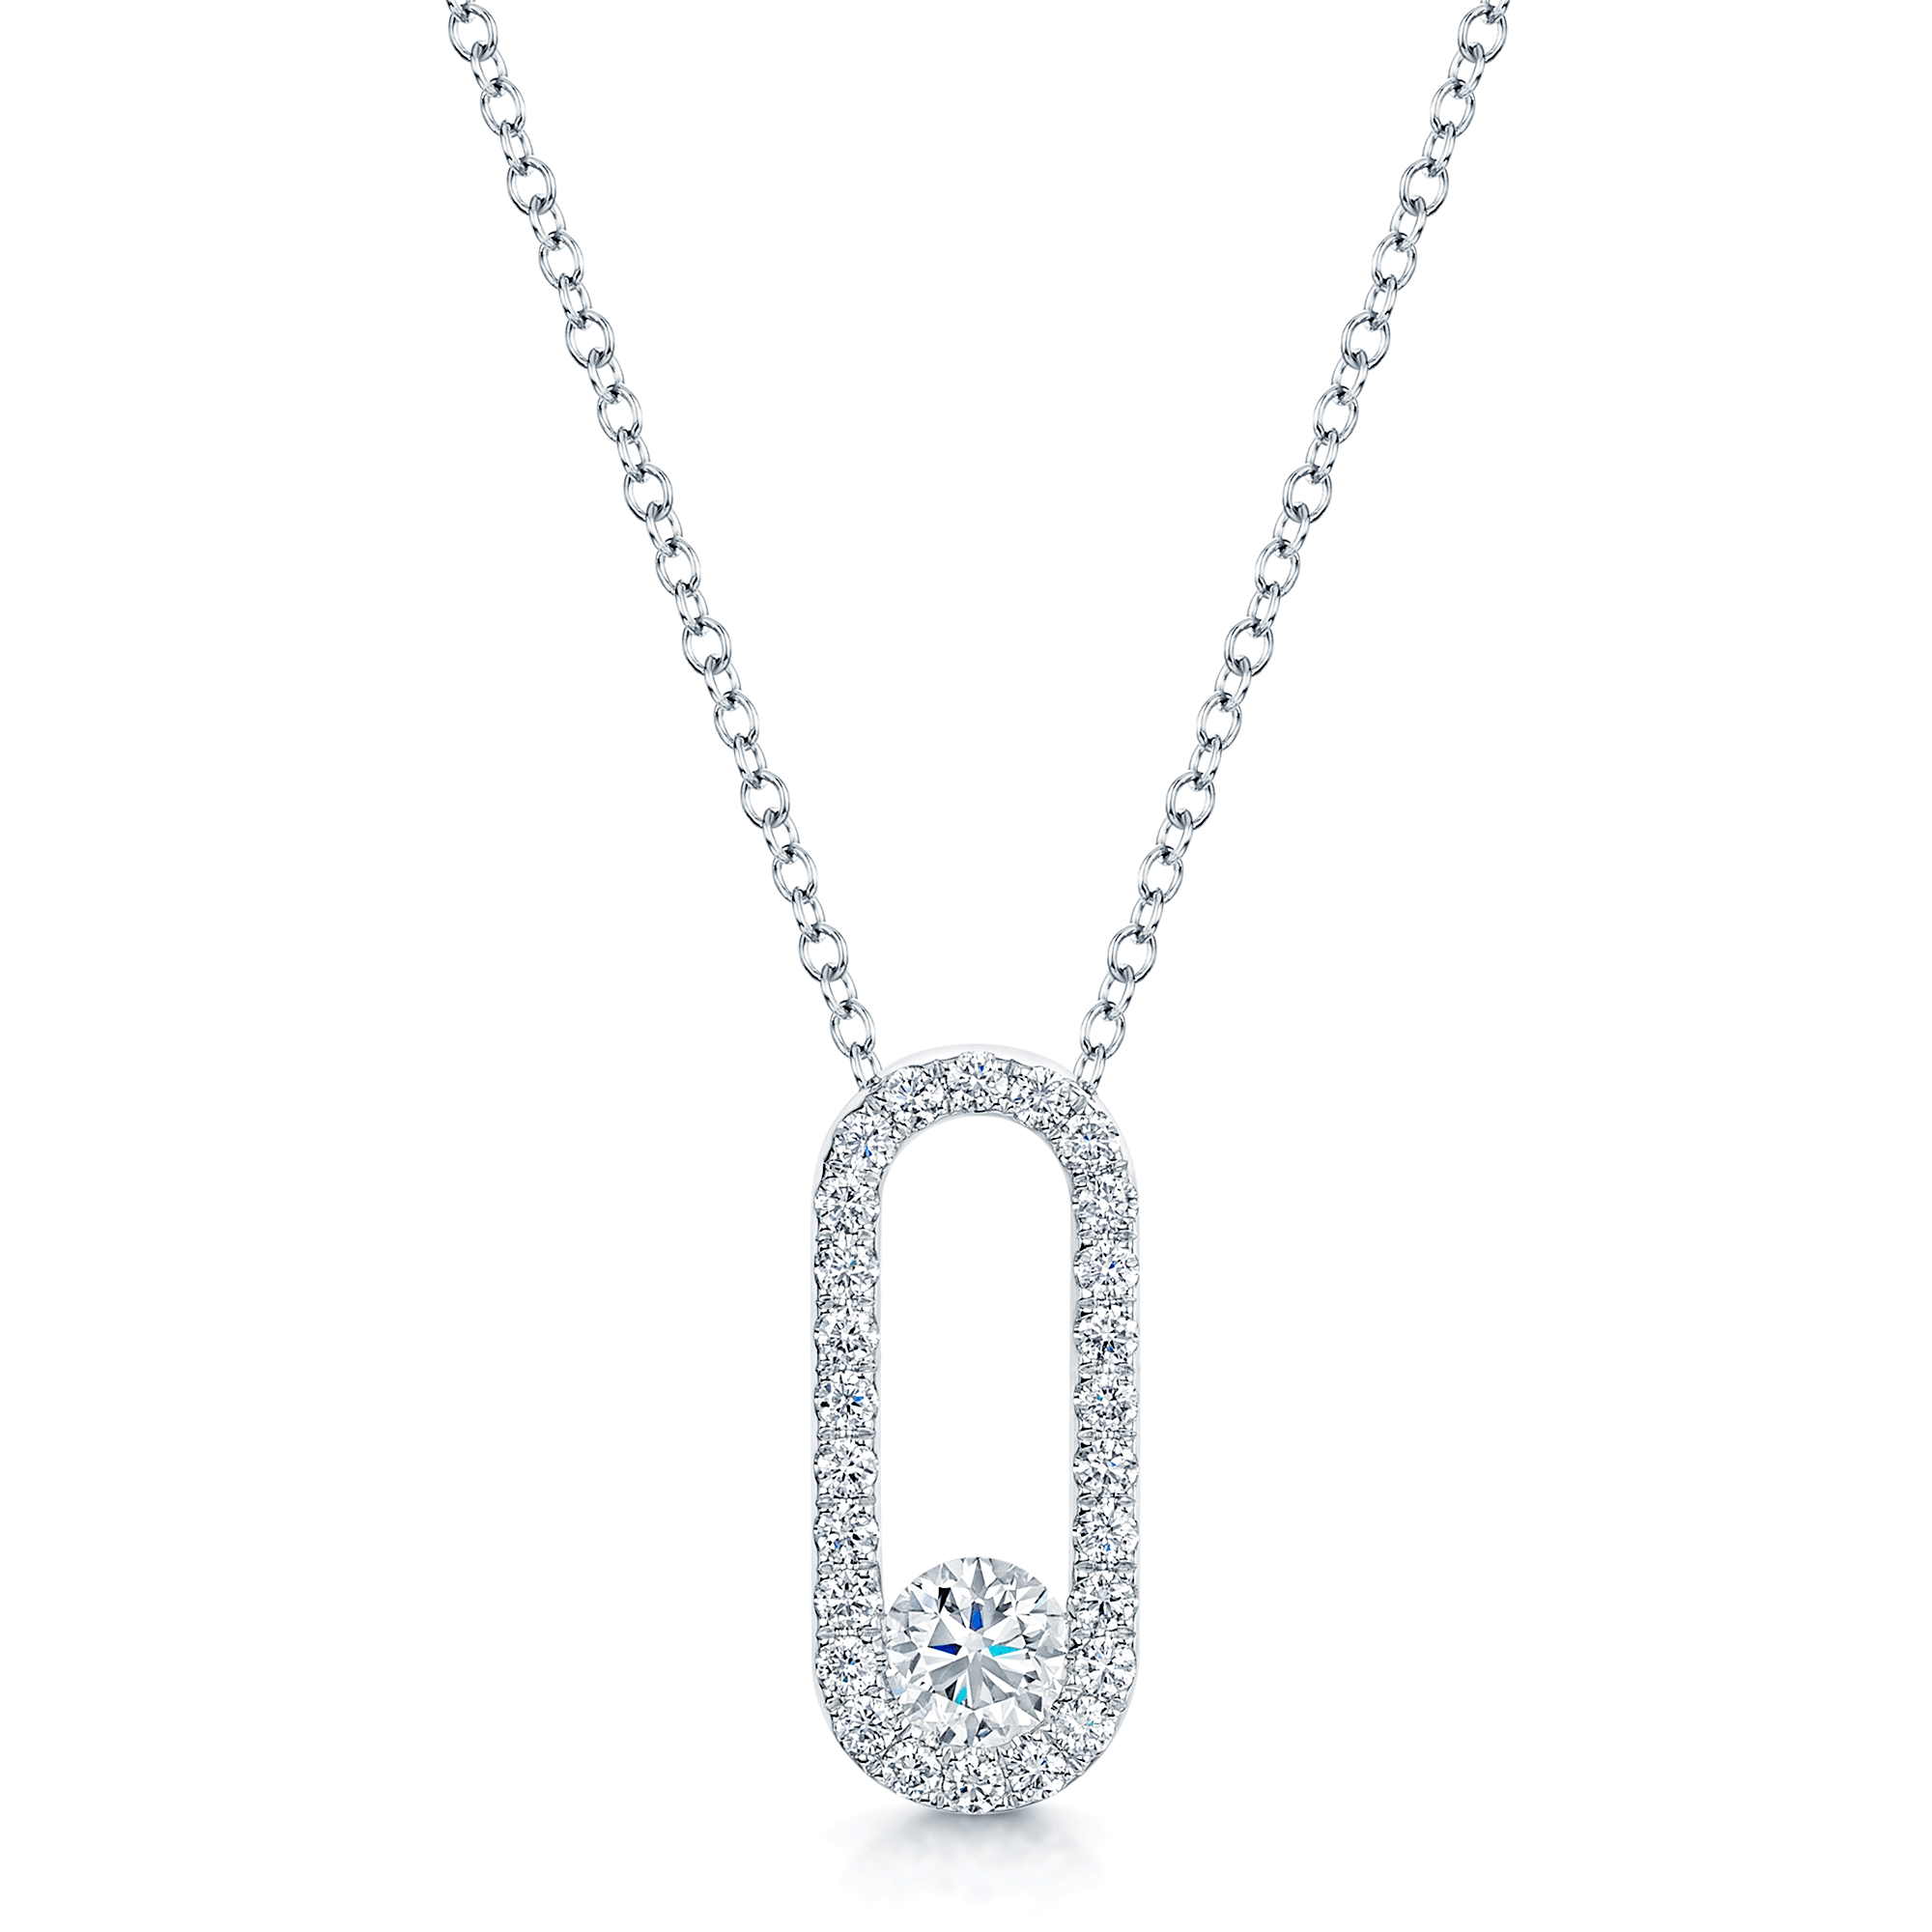 Verve Collection 18ct White Gold GIA Certificated Diamond Loop Full Pendant